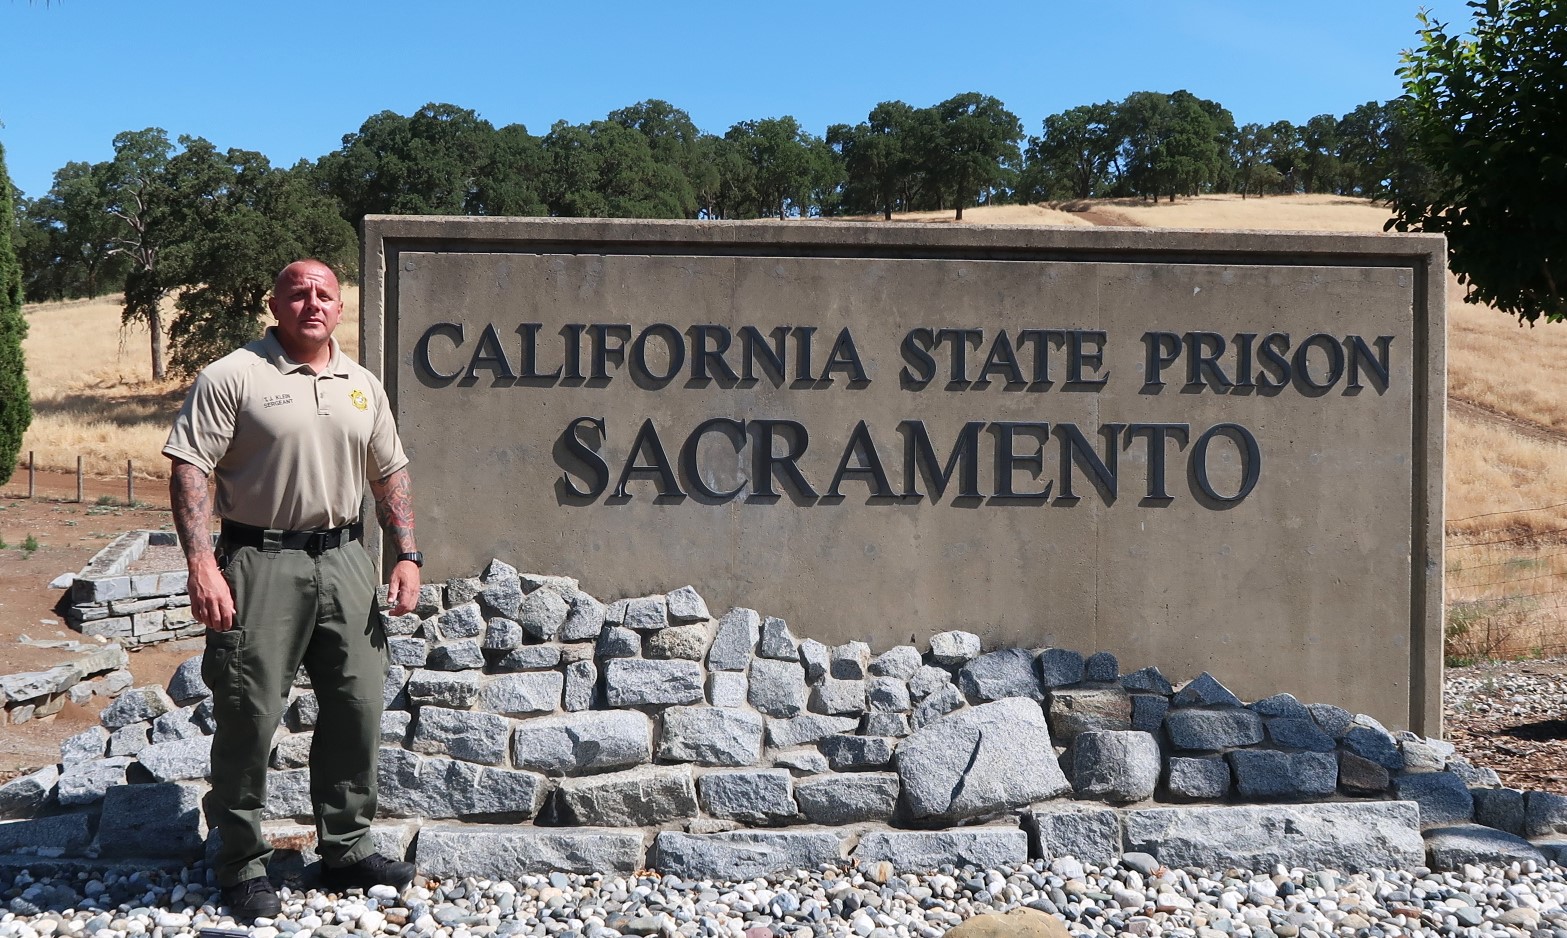 Correctional sergeant stands beside California State Prison Sacramento sign.